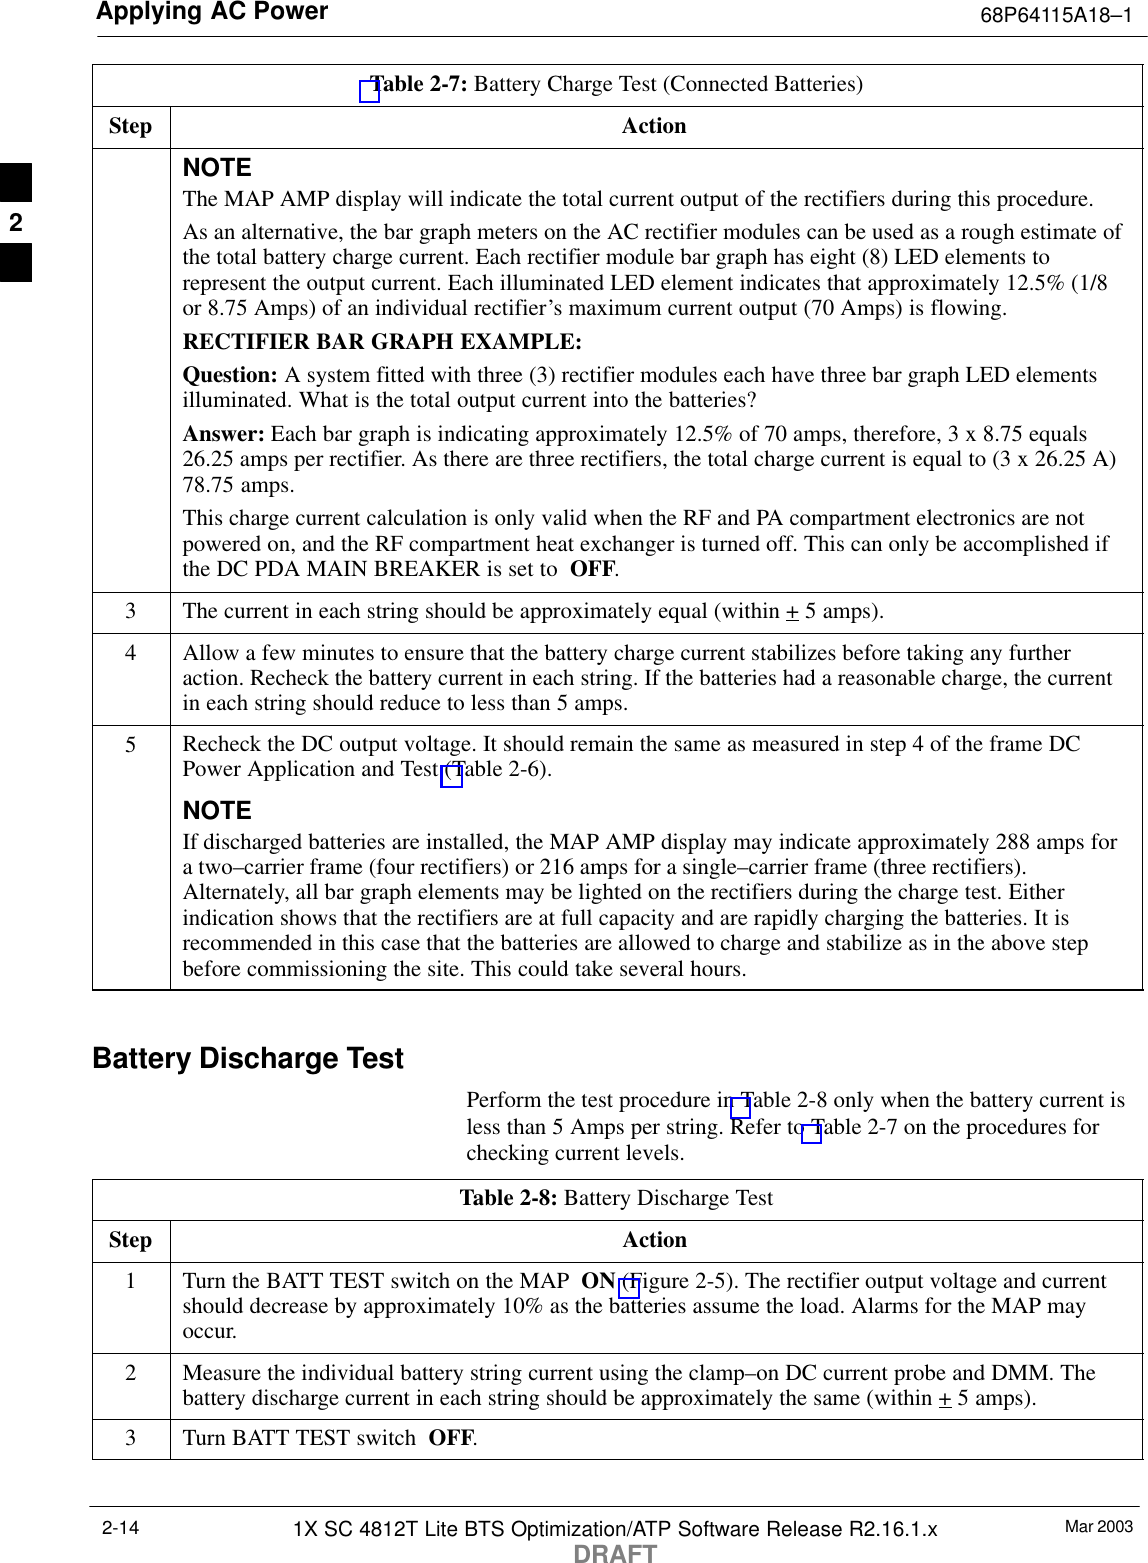 Applying AC Power 68P64115A18–1Mar 20031X SC 4812T Lite BTS Optimization/ATP Software Release R2.16.1.xDRAFT2-14Table 2-7: Battery Charge Test (Connected Batteries)Step ActionNOTEThe MAP AMP display will indicate the total current output of the rectifiers during this procedure.As an alternative, the bar graph meters on the AC rectifier modules can be used as a rough estimate ofthe total battery charge current. Each rectifier module bar graph has eight (8) LED elements torepresent the output current. Each illuminated LED element indicates that approximately 12.5% (1/8or 8.75 Amps) of an individual rectifier’s maximum current output (70 Amps) is flowing.RECTIFIER BAR GRAPH EXAMPLE:Question: A system fitted with three (3) rectifier modules each have three bar graph LED elementsilluminated. What is the total output current into the batteries?Answer: Each bar graph is indicating approximately 12.5% of 70 amps, therefore, 3 x 8.75 equals26.25 amps per rectifier. As there are three rectifiers, the total charge current is equal to (3 x 26.25 A)78.75 amps.This charge current calculation is only valid when the RF and PA compartment electronics are notpowered on, and the RF compartment heat exchanger is turned off. This can only be accomplished ifthe DC PDA MAIN BREAKER is set to  OFF.3The current in each string should be approximately equal (within + 5 amps).4Allow a few minutes to ensure that the battery charge current stabilizes before taking any furtheraction. Recheck the battery current in each string. If the batteries had a reasonable charge, the currentin each string should reduce to less than 5 amps.5Recheck the DC output voltage. It should remain the same as measured in step 4 of the frame DCPower Application and Test (Table 2-6).NOTEIf discharged batteries are installed, the MAP AMP display may indicate approximately 288 amps fora two–carrier frame (four rectifiers) or 216 amps for a single–carrier frame (three rectifiers).Alternately, all bar graph elements may be lighted on the rectifiers during the charge test. Eitherindication shows that the rectifiers are at full capacity and are rapidly charging the batteries. It isrecommended in this case that the batteries are allowed to charge and stabilize as in the above stepbefore commissioning the site. This could take several hours. Battery Discharge TestPerform the test procedure in Table 2-8 only when the battery current isless than 5 Amps per string. Refer to Table 2-7 on the procedures forchecking current levels.Table 2-8: Battery Discharge TestStep Action1Turn the BATT TEST switch on the MAP  ON (Figure 2-5). The rectifier output voltage and currentshould decrease by approximately 10% as the batteries assume the load. Alarms for the MAP mayoccur.2Measure the individual battery string current using the clamp–on DC current probe and DMM. Thebattery discharge current in each string should be approximately the same (within + 5 amps).3Turn BATT TEST switch  OFF. 2